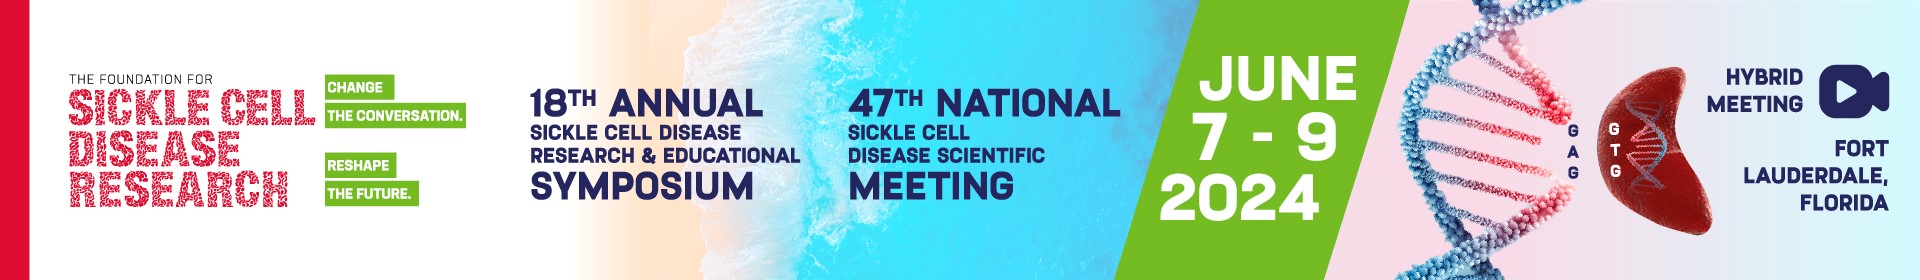 The 18th Annual Sickle Cell Disease Research and Educational Symposium Event Banner